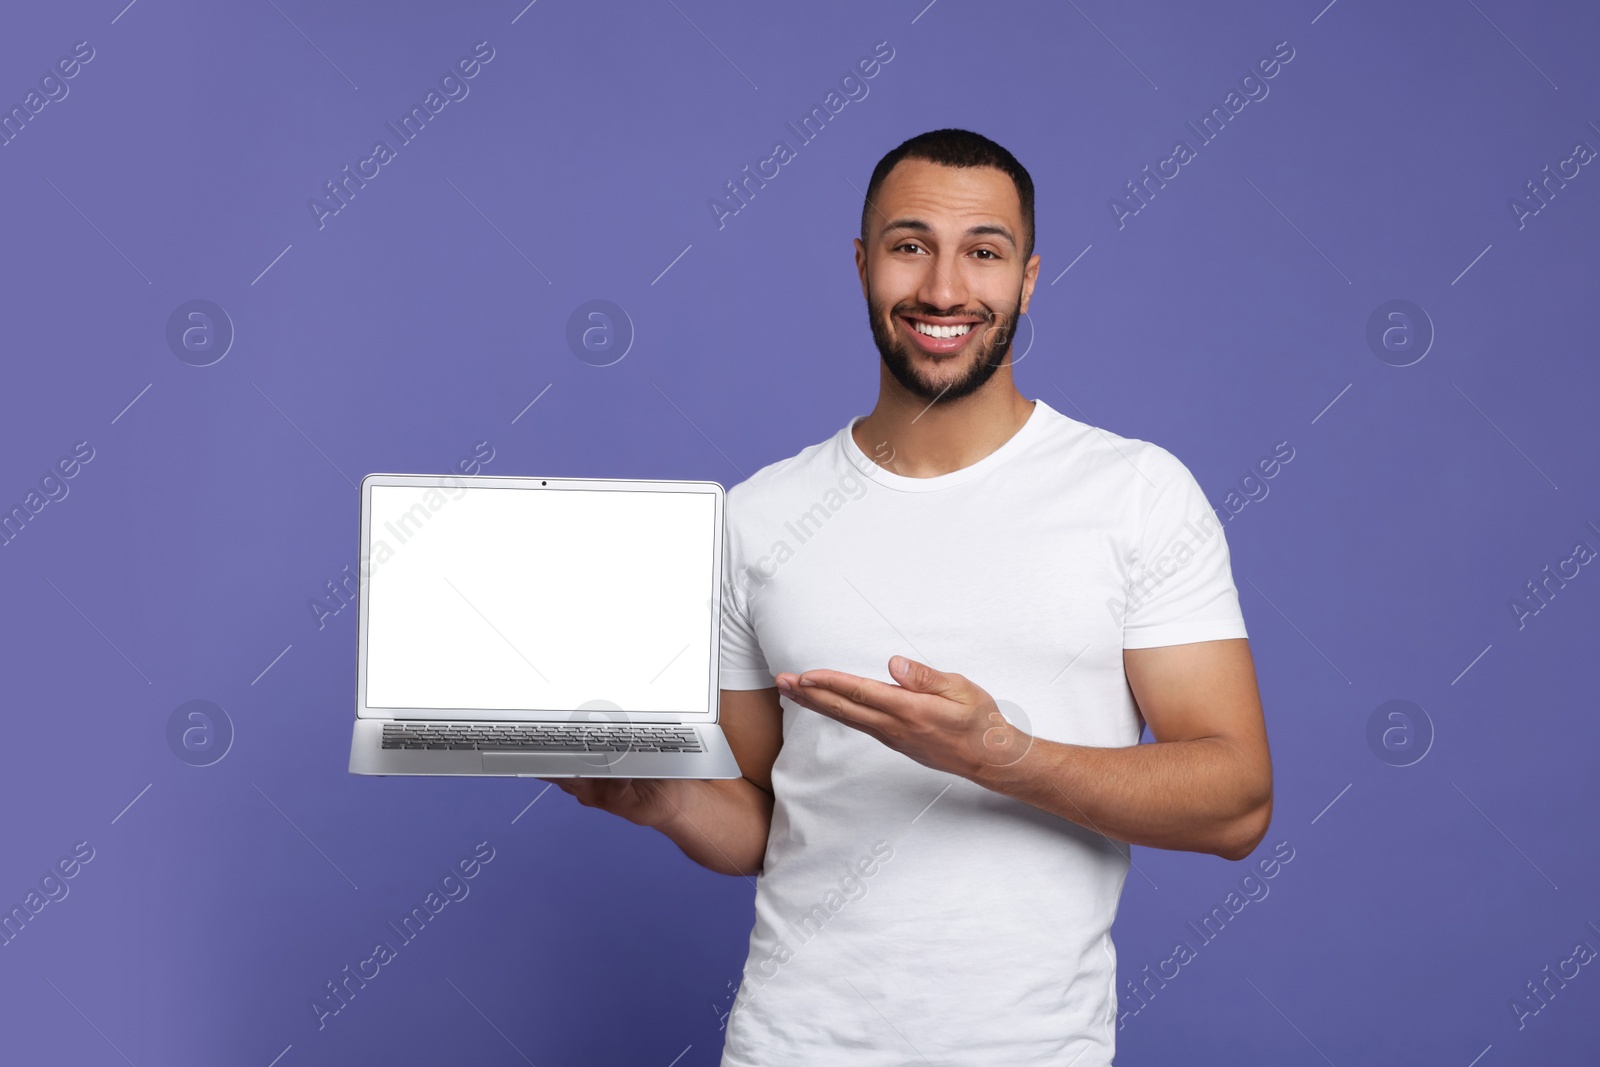 Photo of Smiling young man showing laptop on lilac background